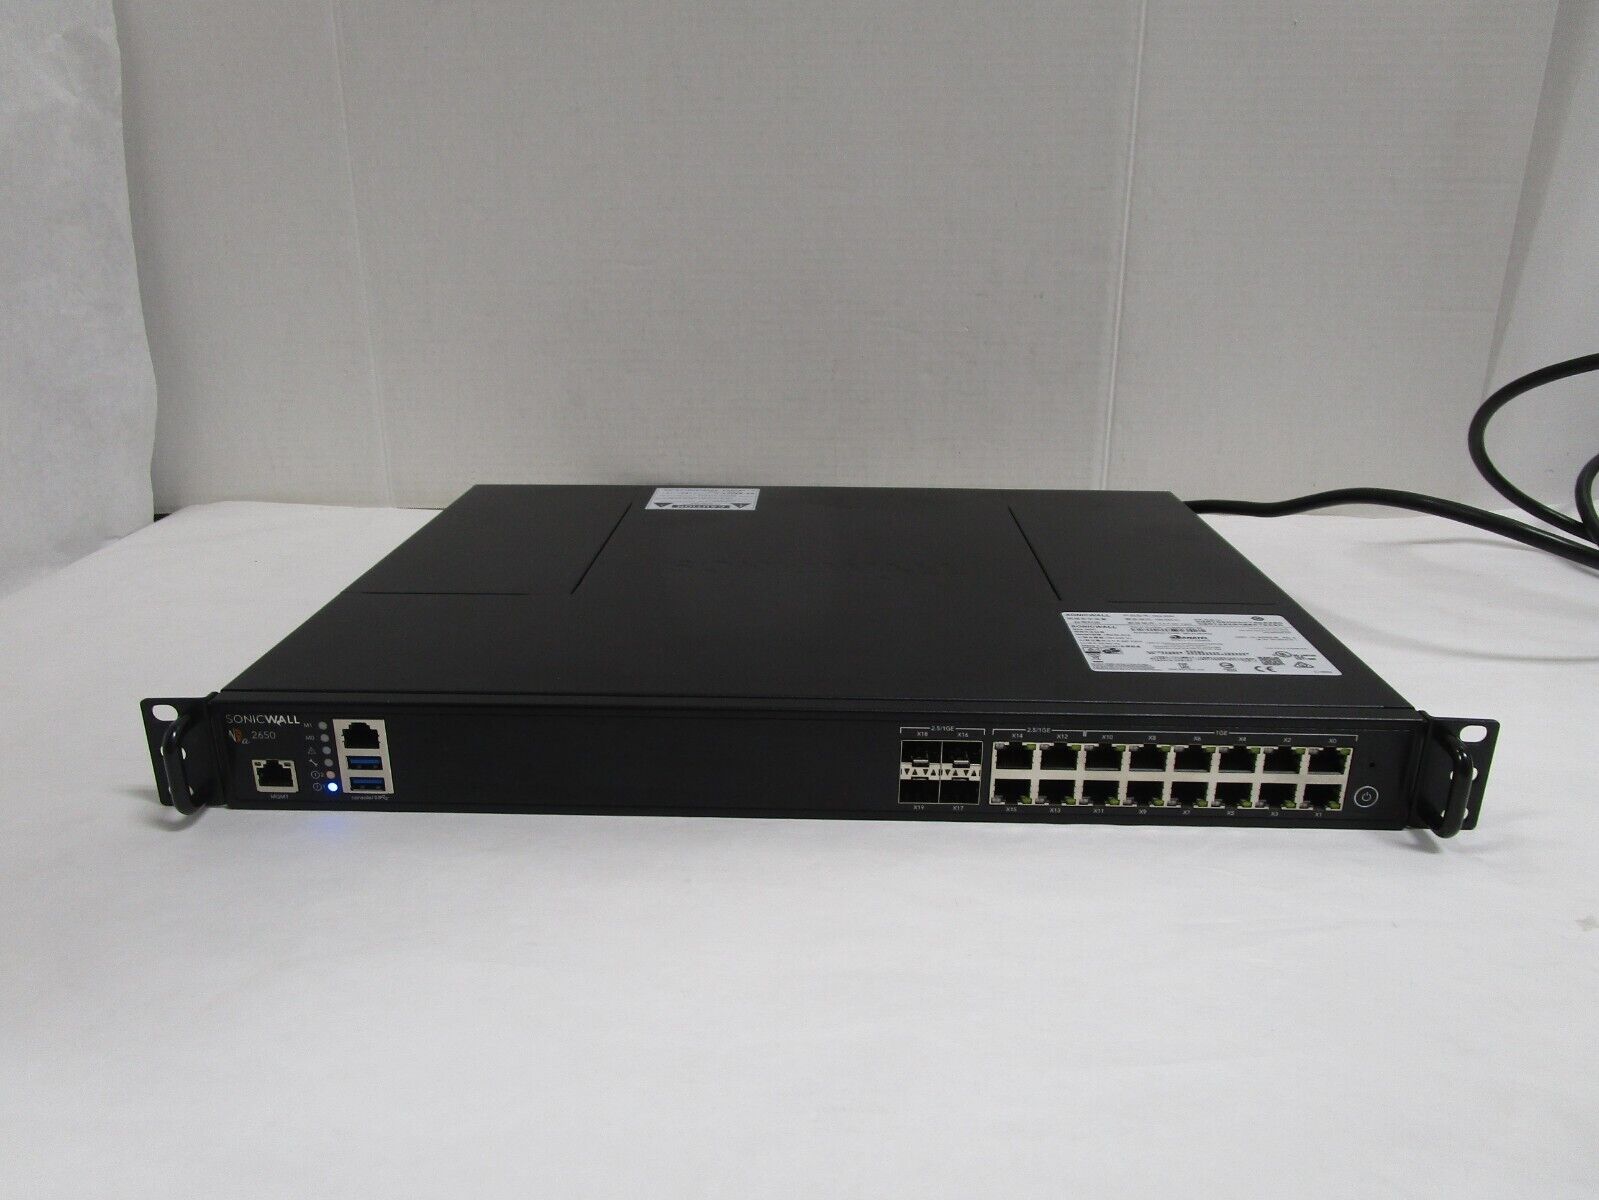 SonicWall NSA2650 Network Security Appliance 1RK38-0C8 USED SEE PHOTO SHIPS FREE